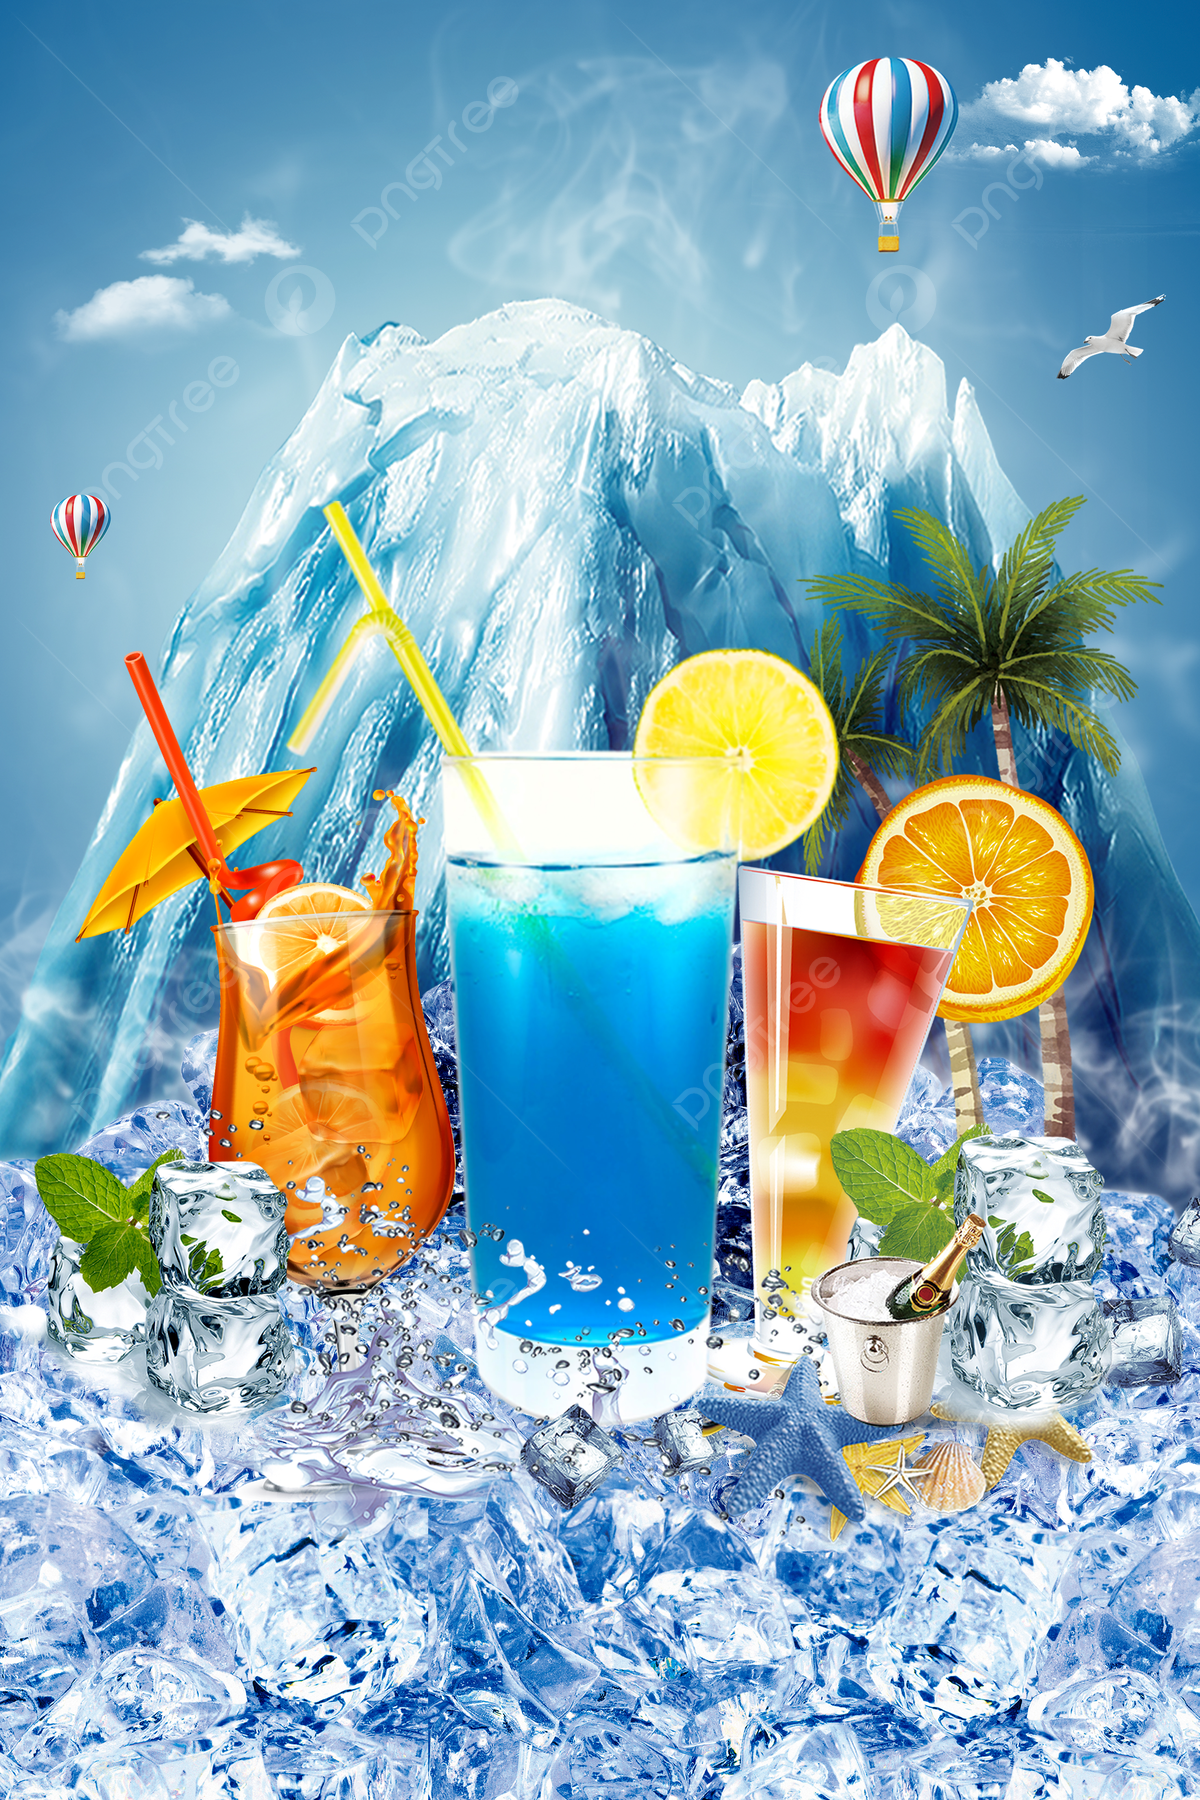 pngtree-cool-summer-cool-ice-cube-picture-image_942136.png